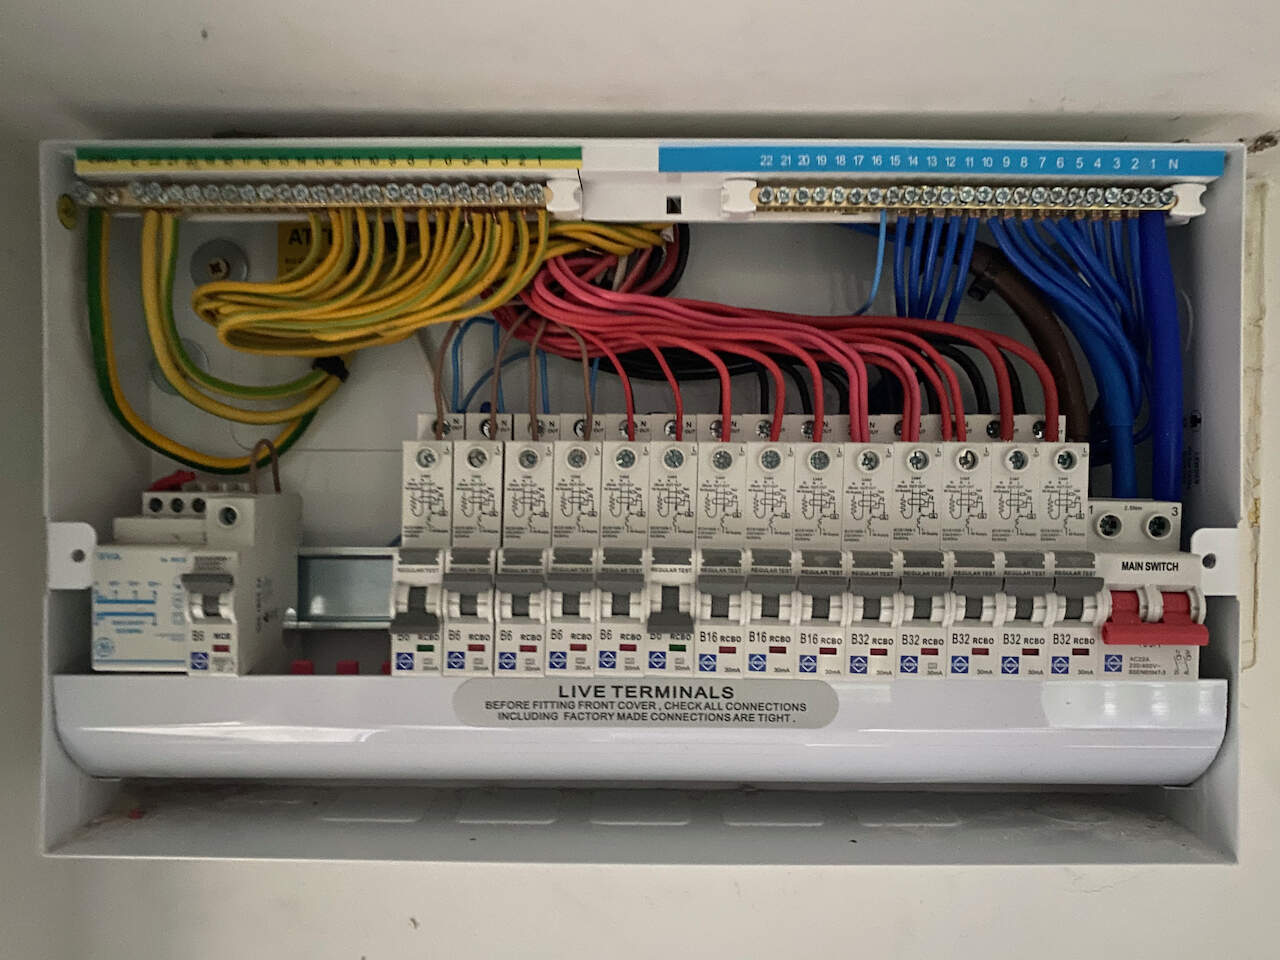 Upgrading of your consumer unit to comply with current regulations.